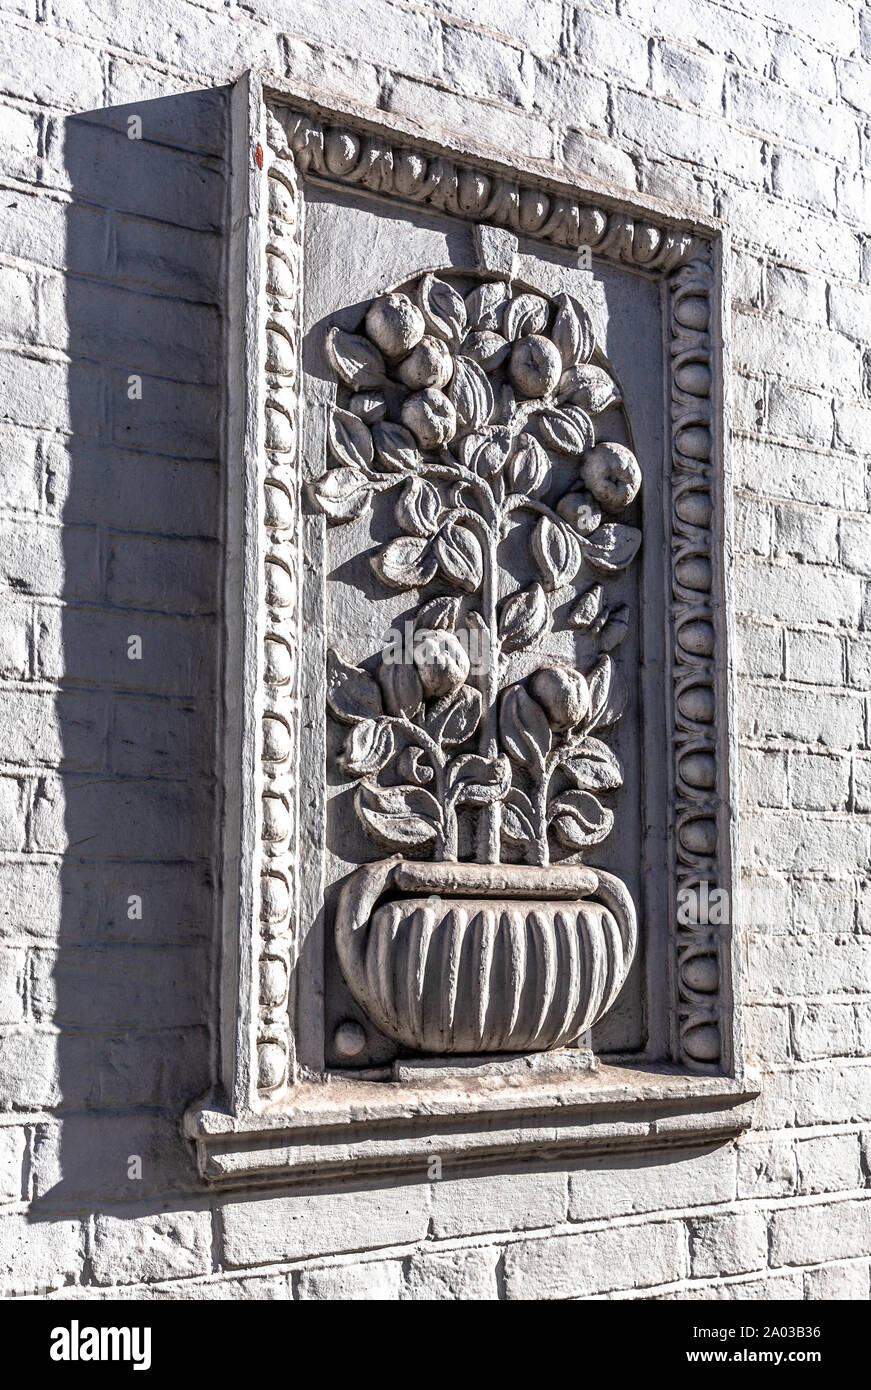 A framed relief sculpture of a plant pot on a brick wall, London, England, UK. Stock Photo